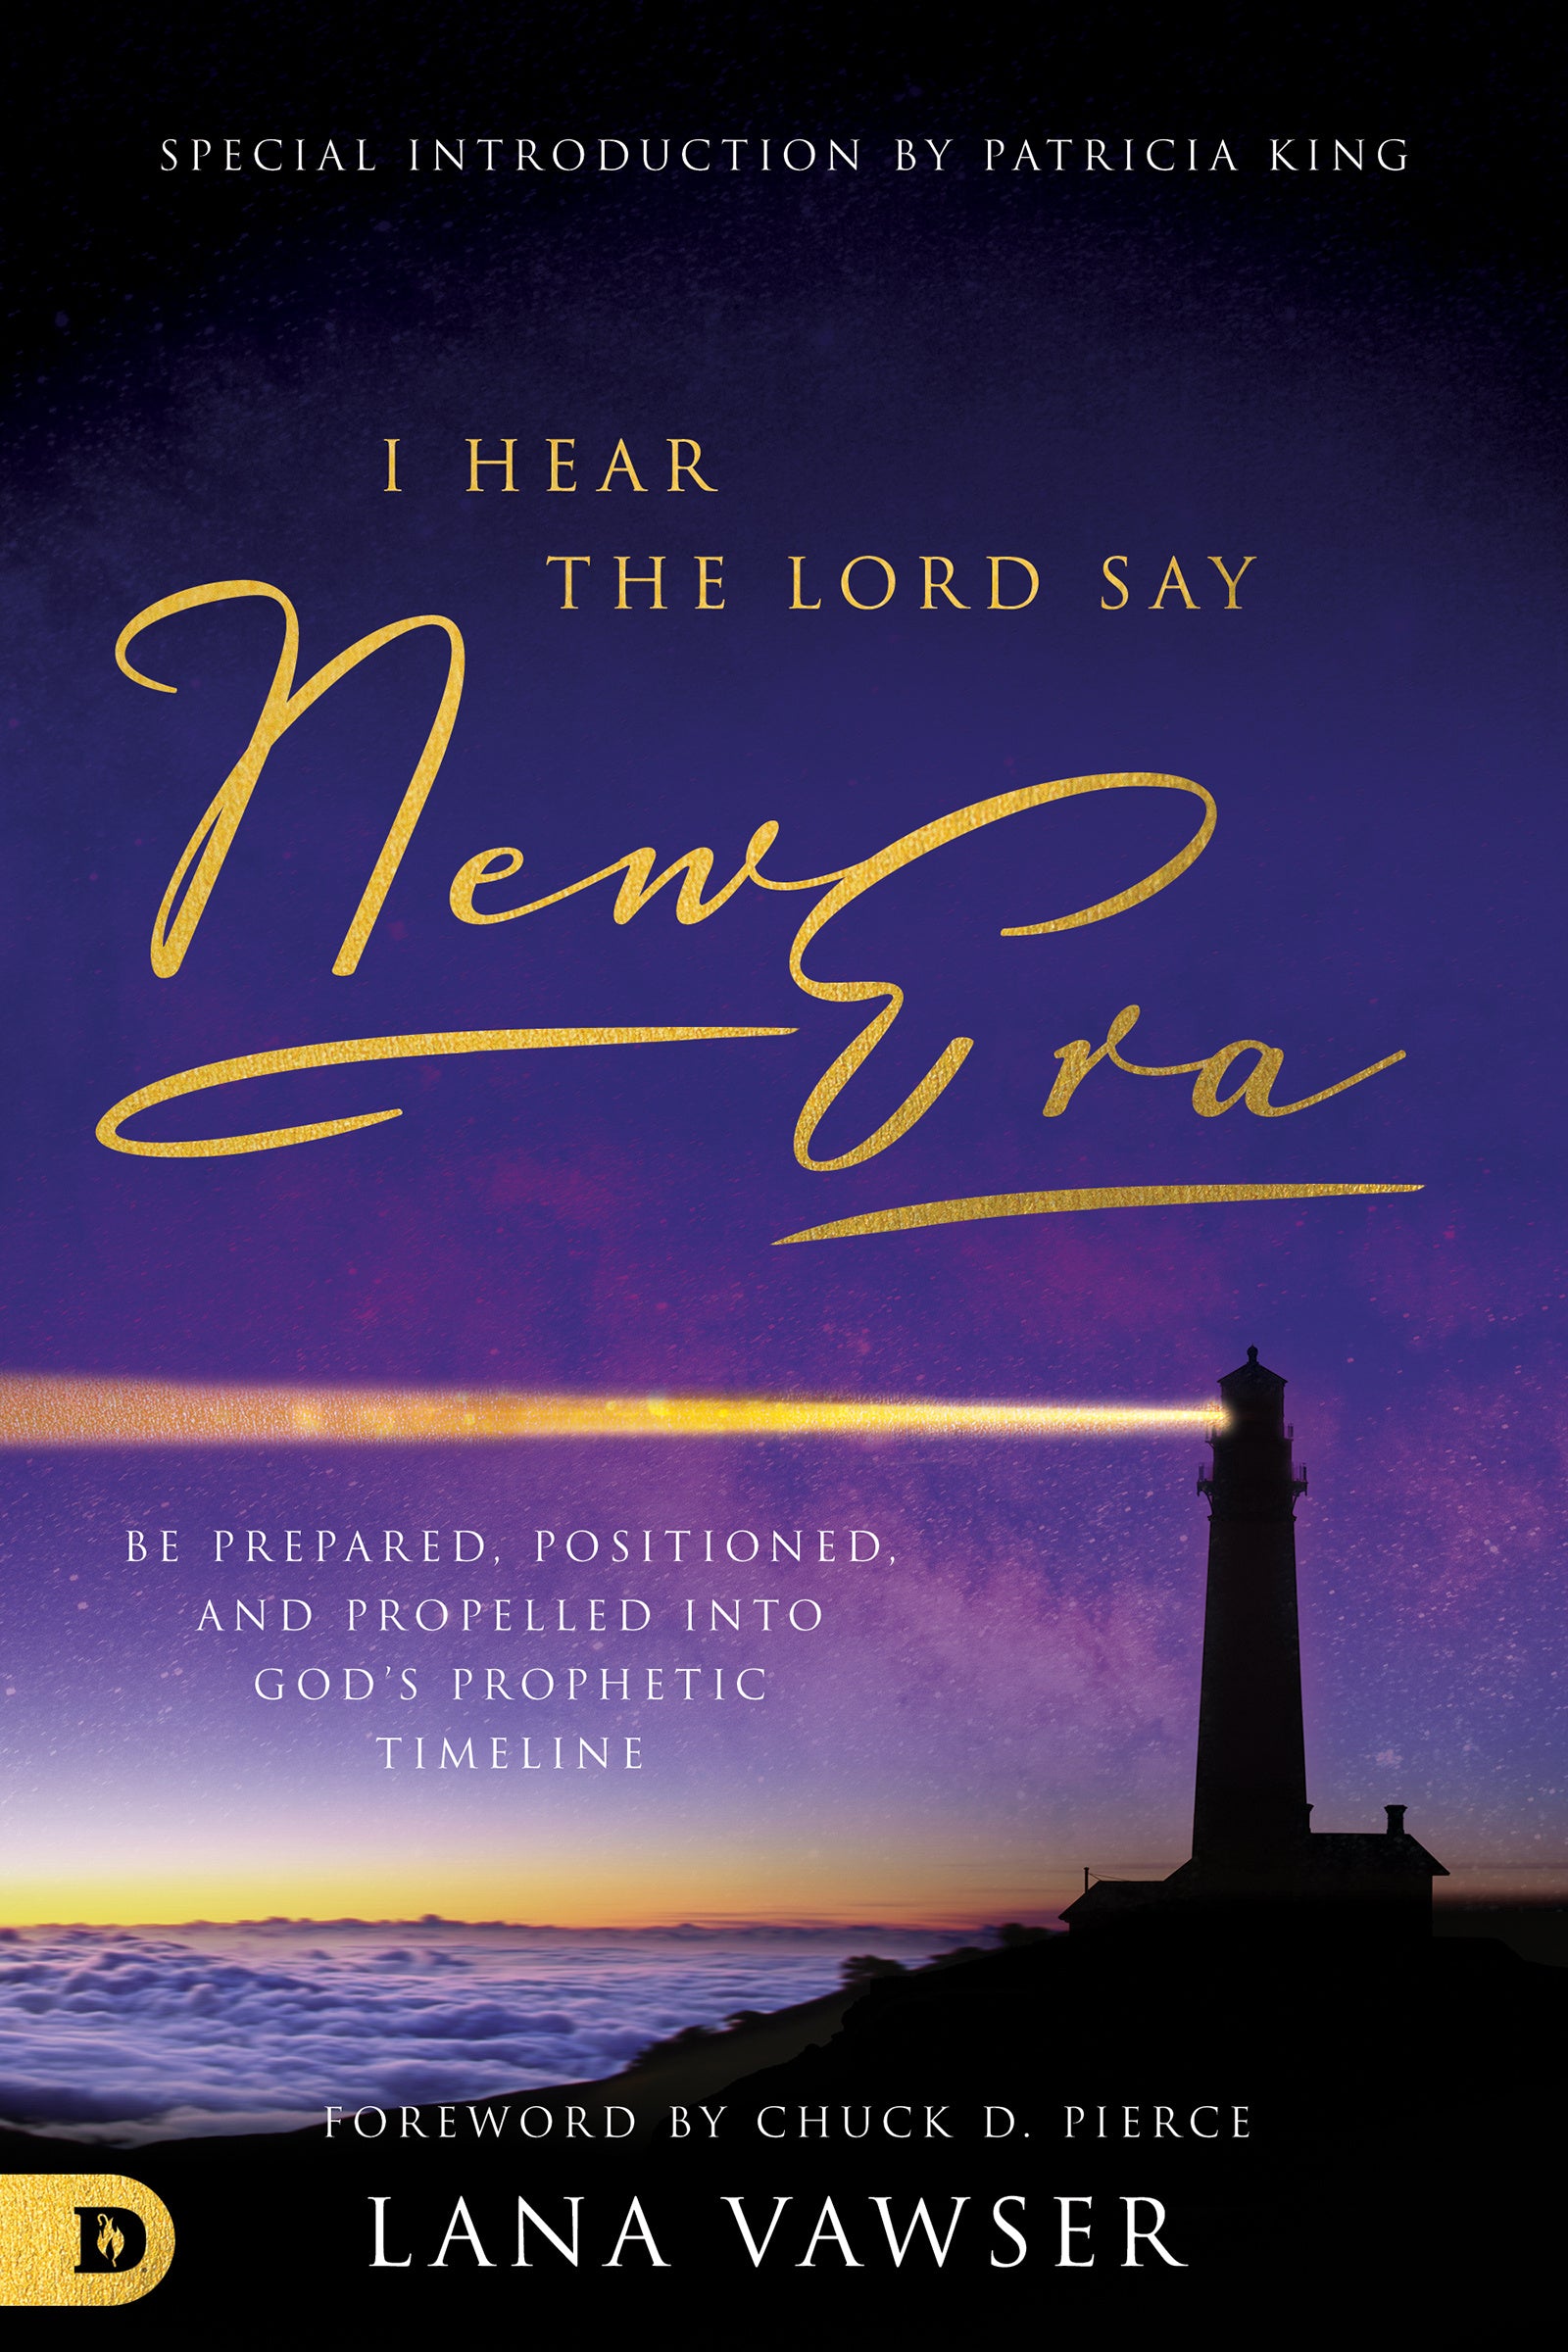 Image of I Hear the Lord Say "New Era" other